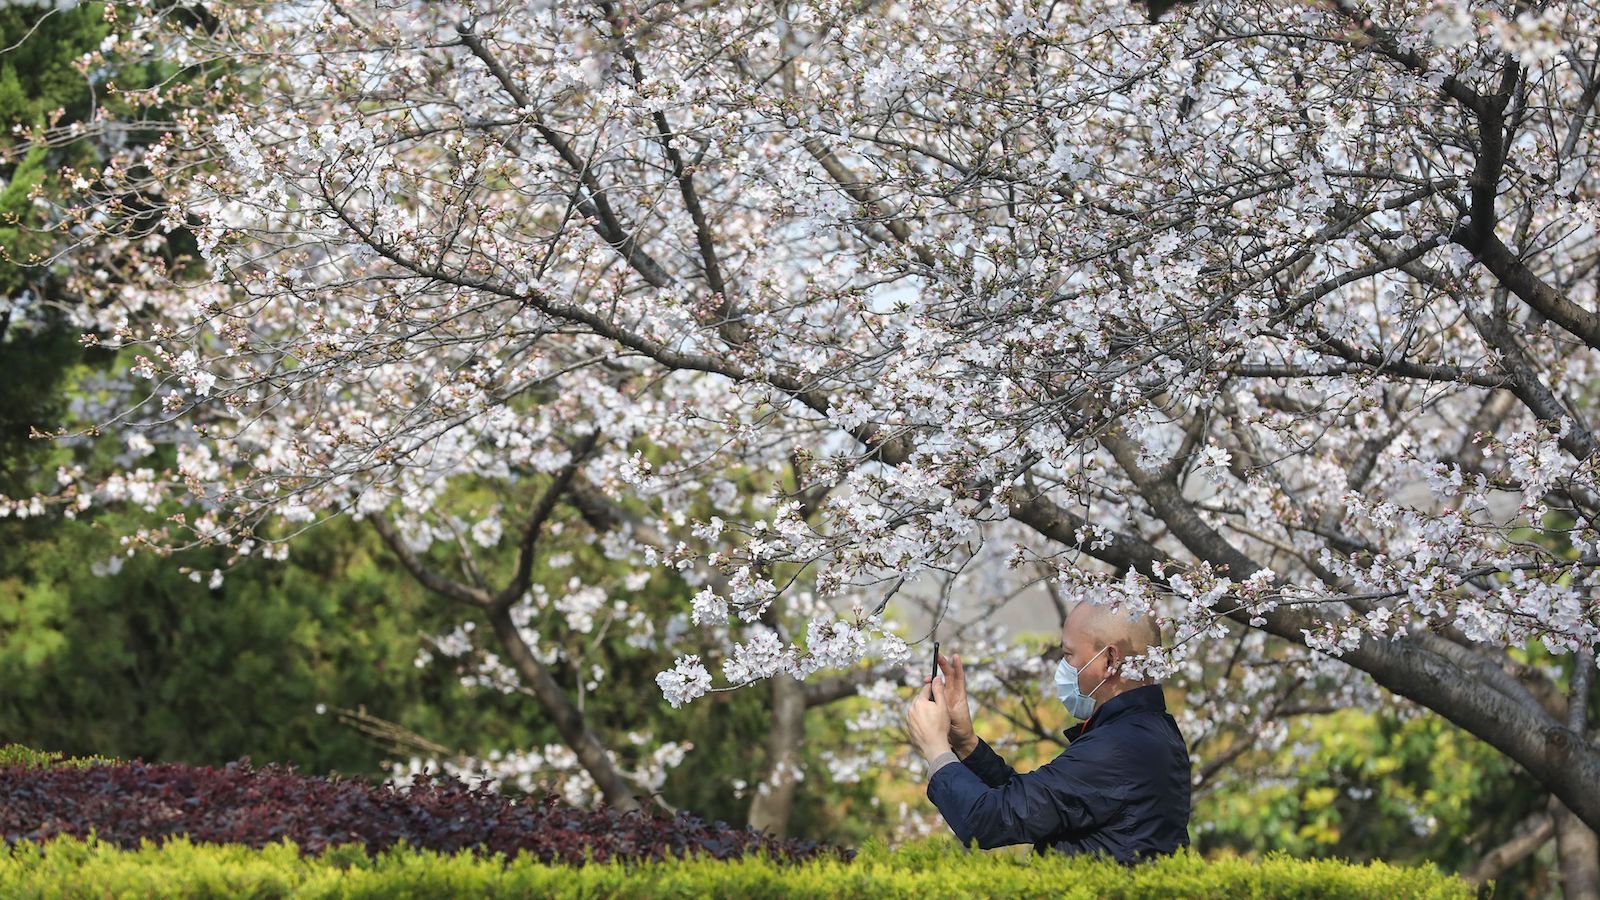 Cherry blossoms bloom in Wuhan, creating stunning scenes of beauty and renewal